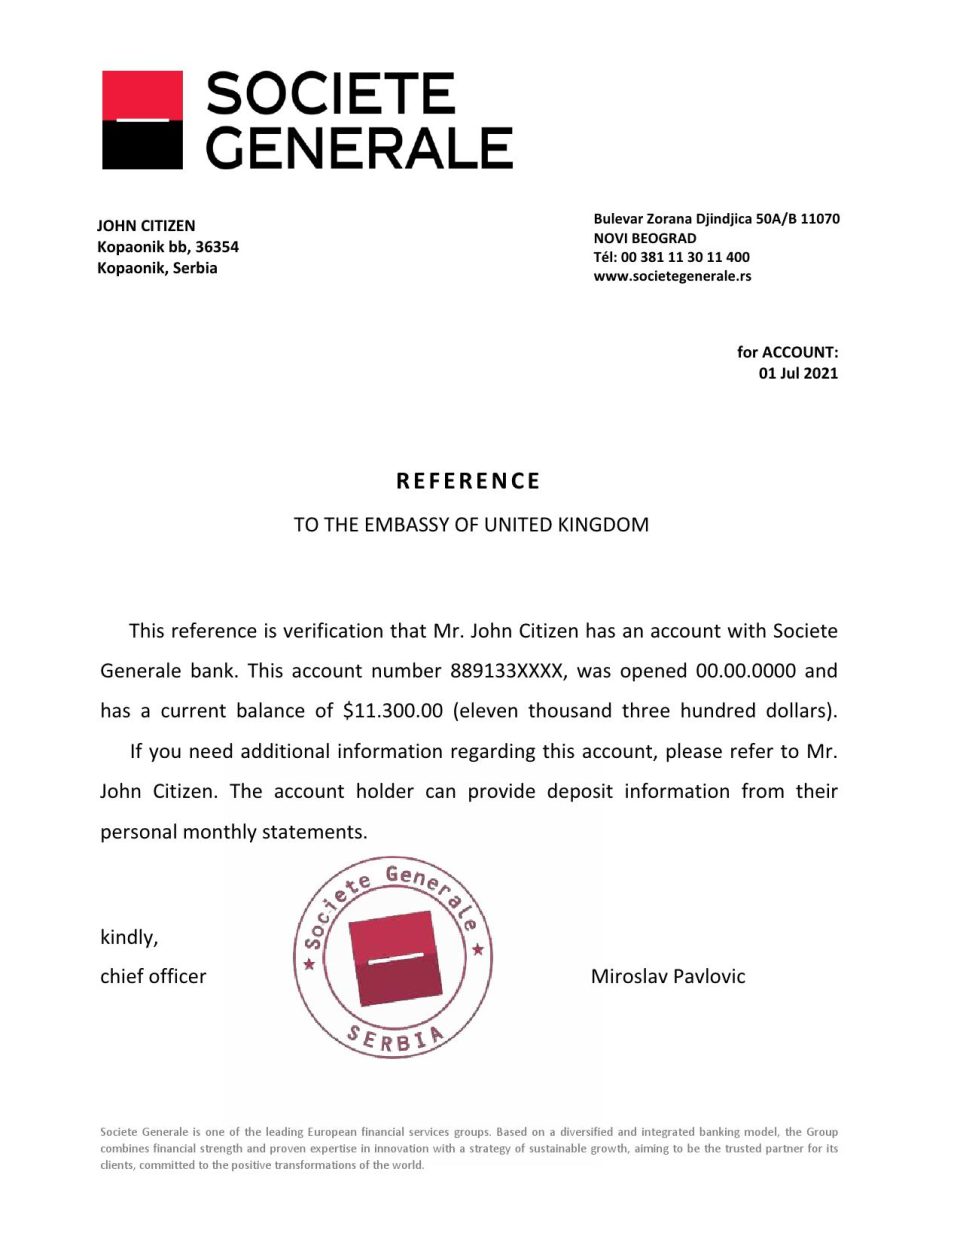 Download Serbia Societe Generale Bank Reference Letter Templates | Editable Word